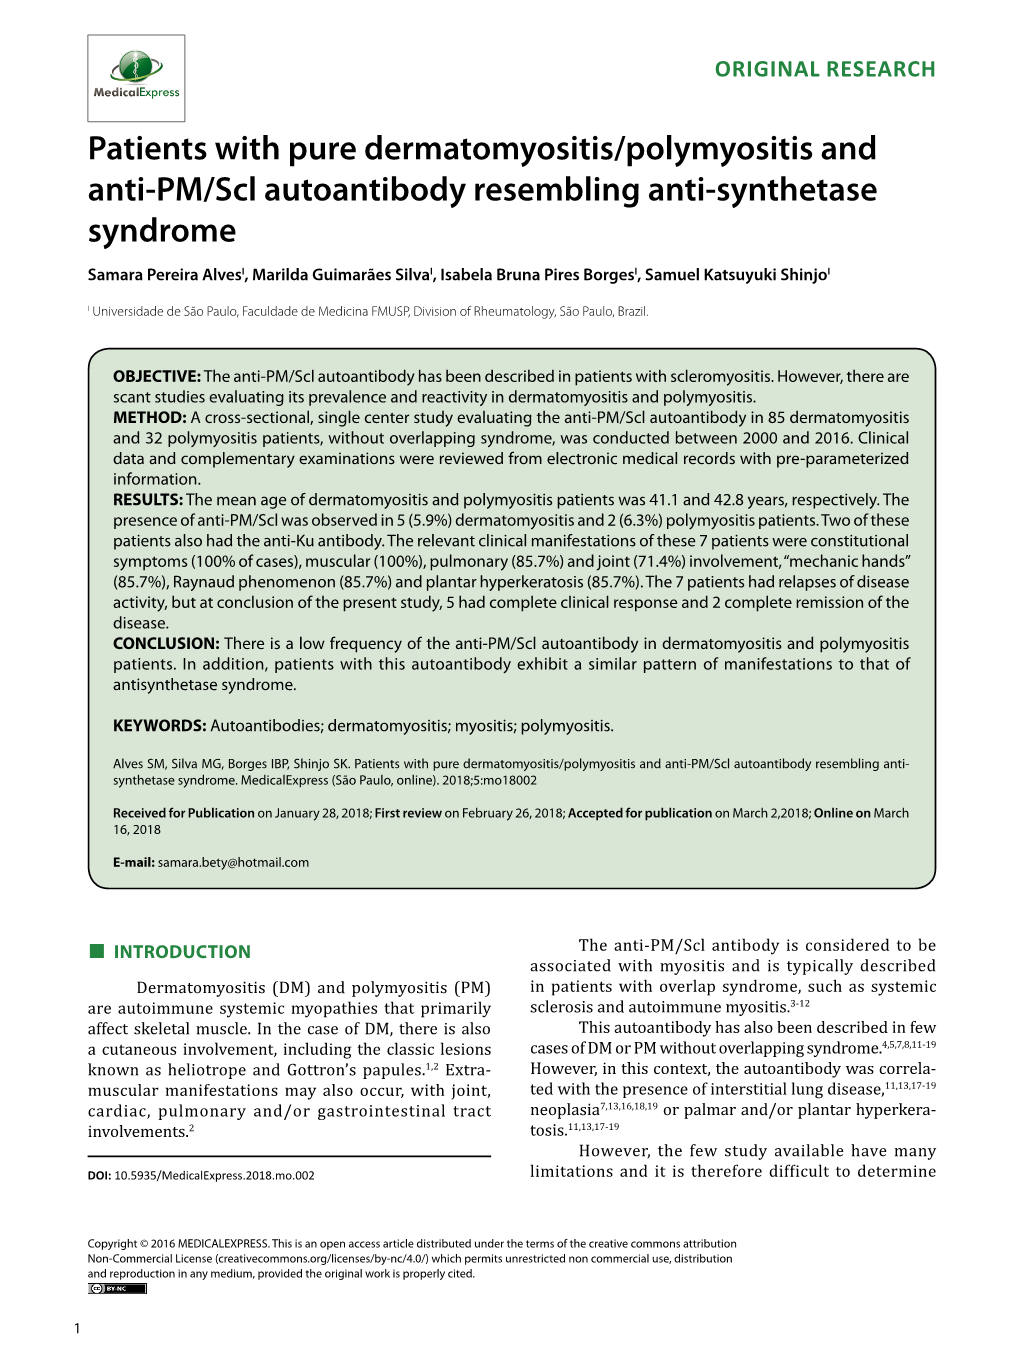 Patients with Pure Dermatomyositis/Polymyositis and Anti-PM/Scl Autoantibody Resembling Anti-Synthetase Syndrome